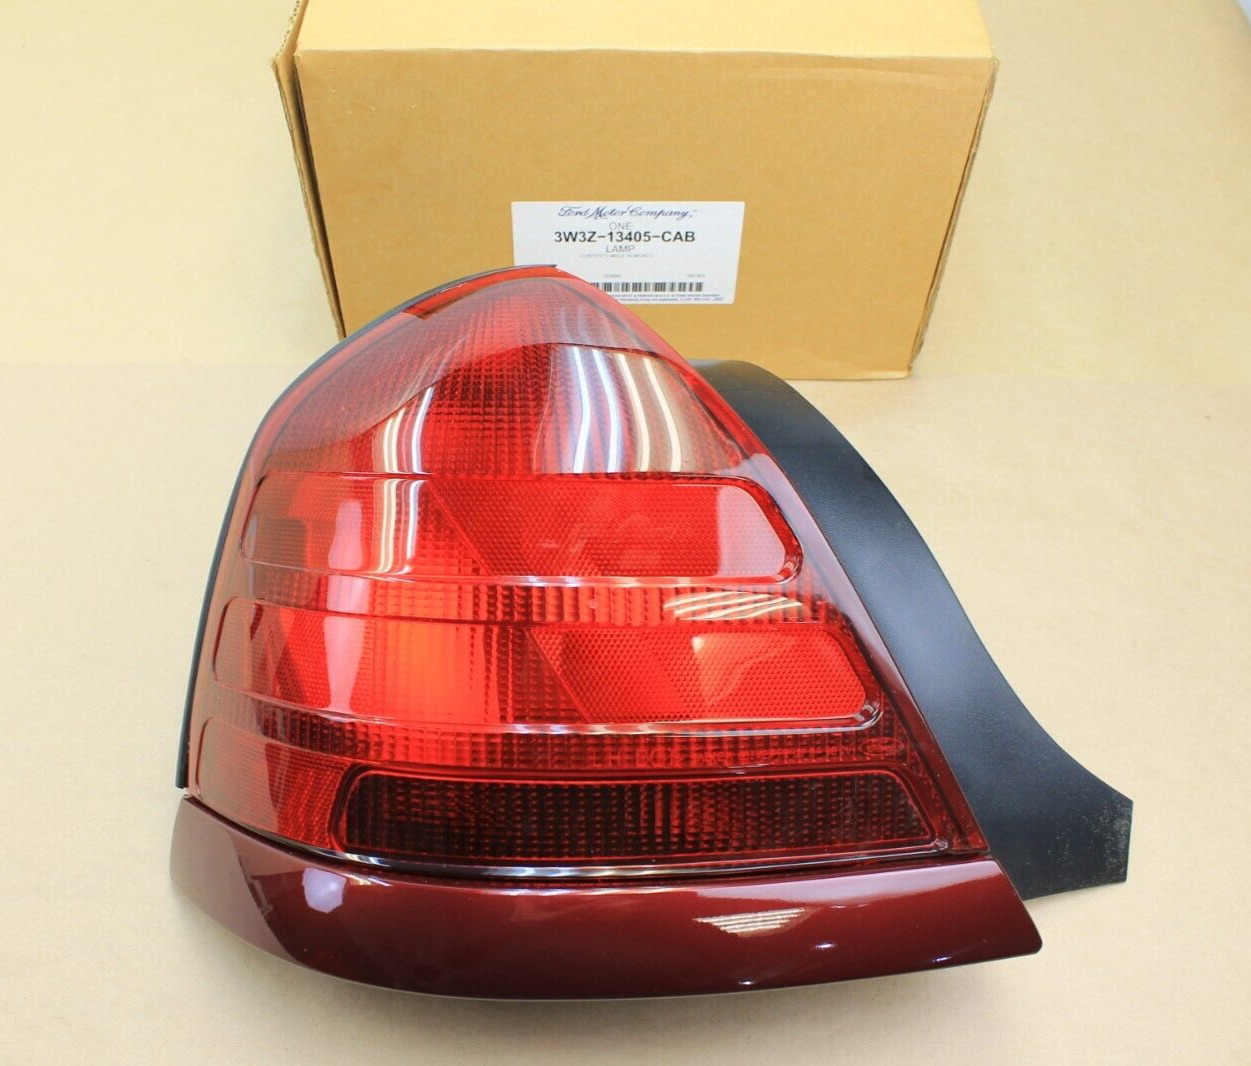 NOS Ford Left Rear Tail Light Lamp Taillight for 2003-2005 Mercury Marauder Red